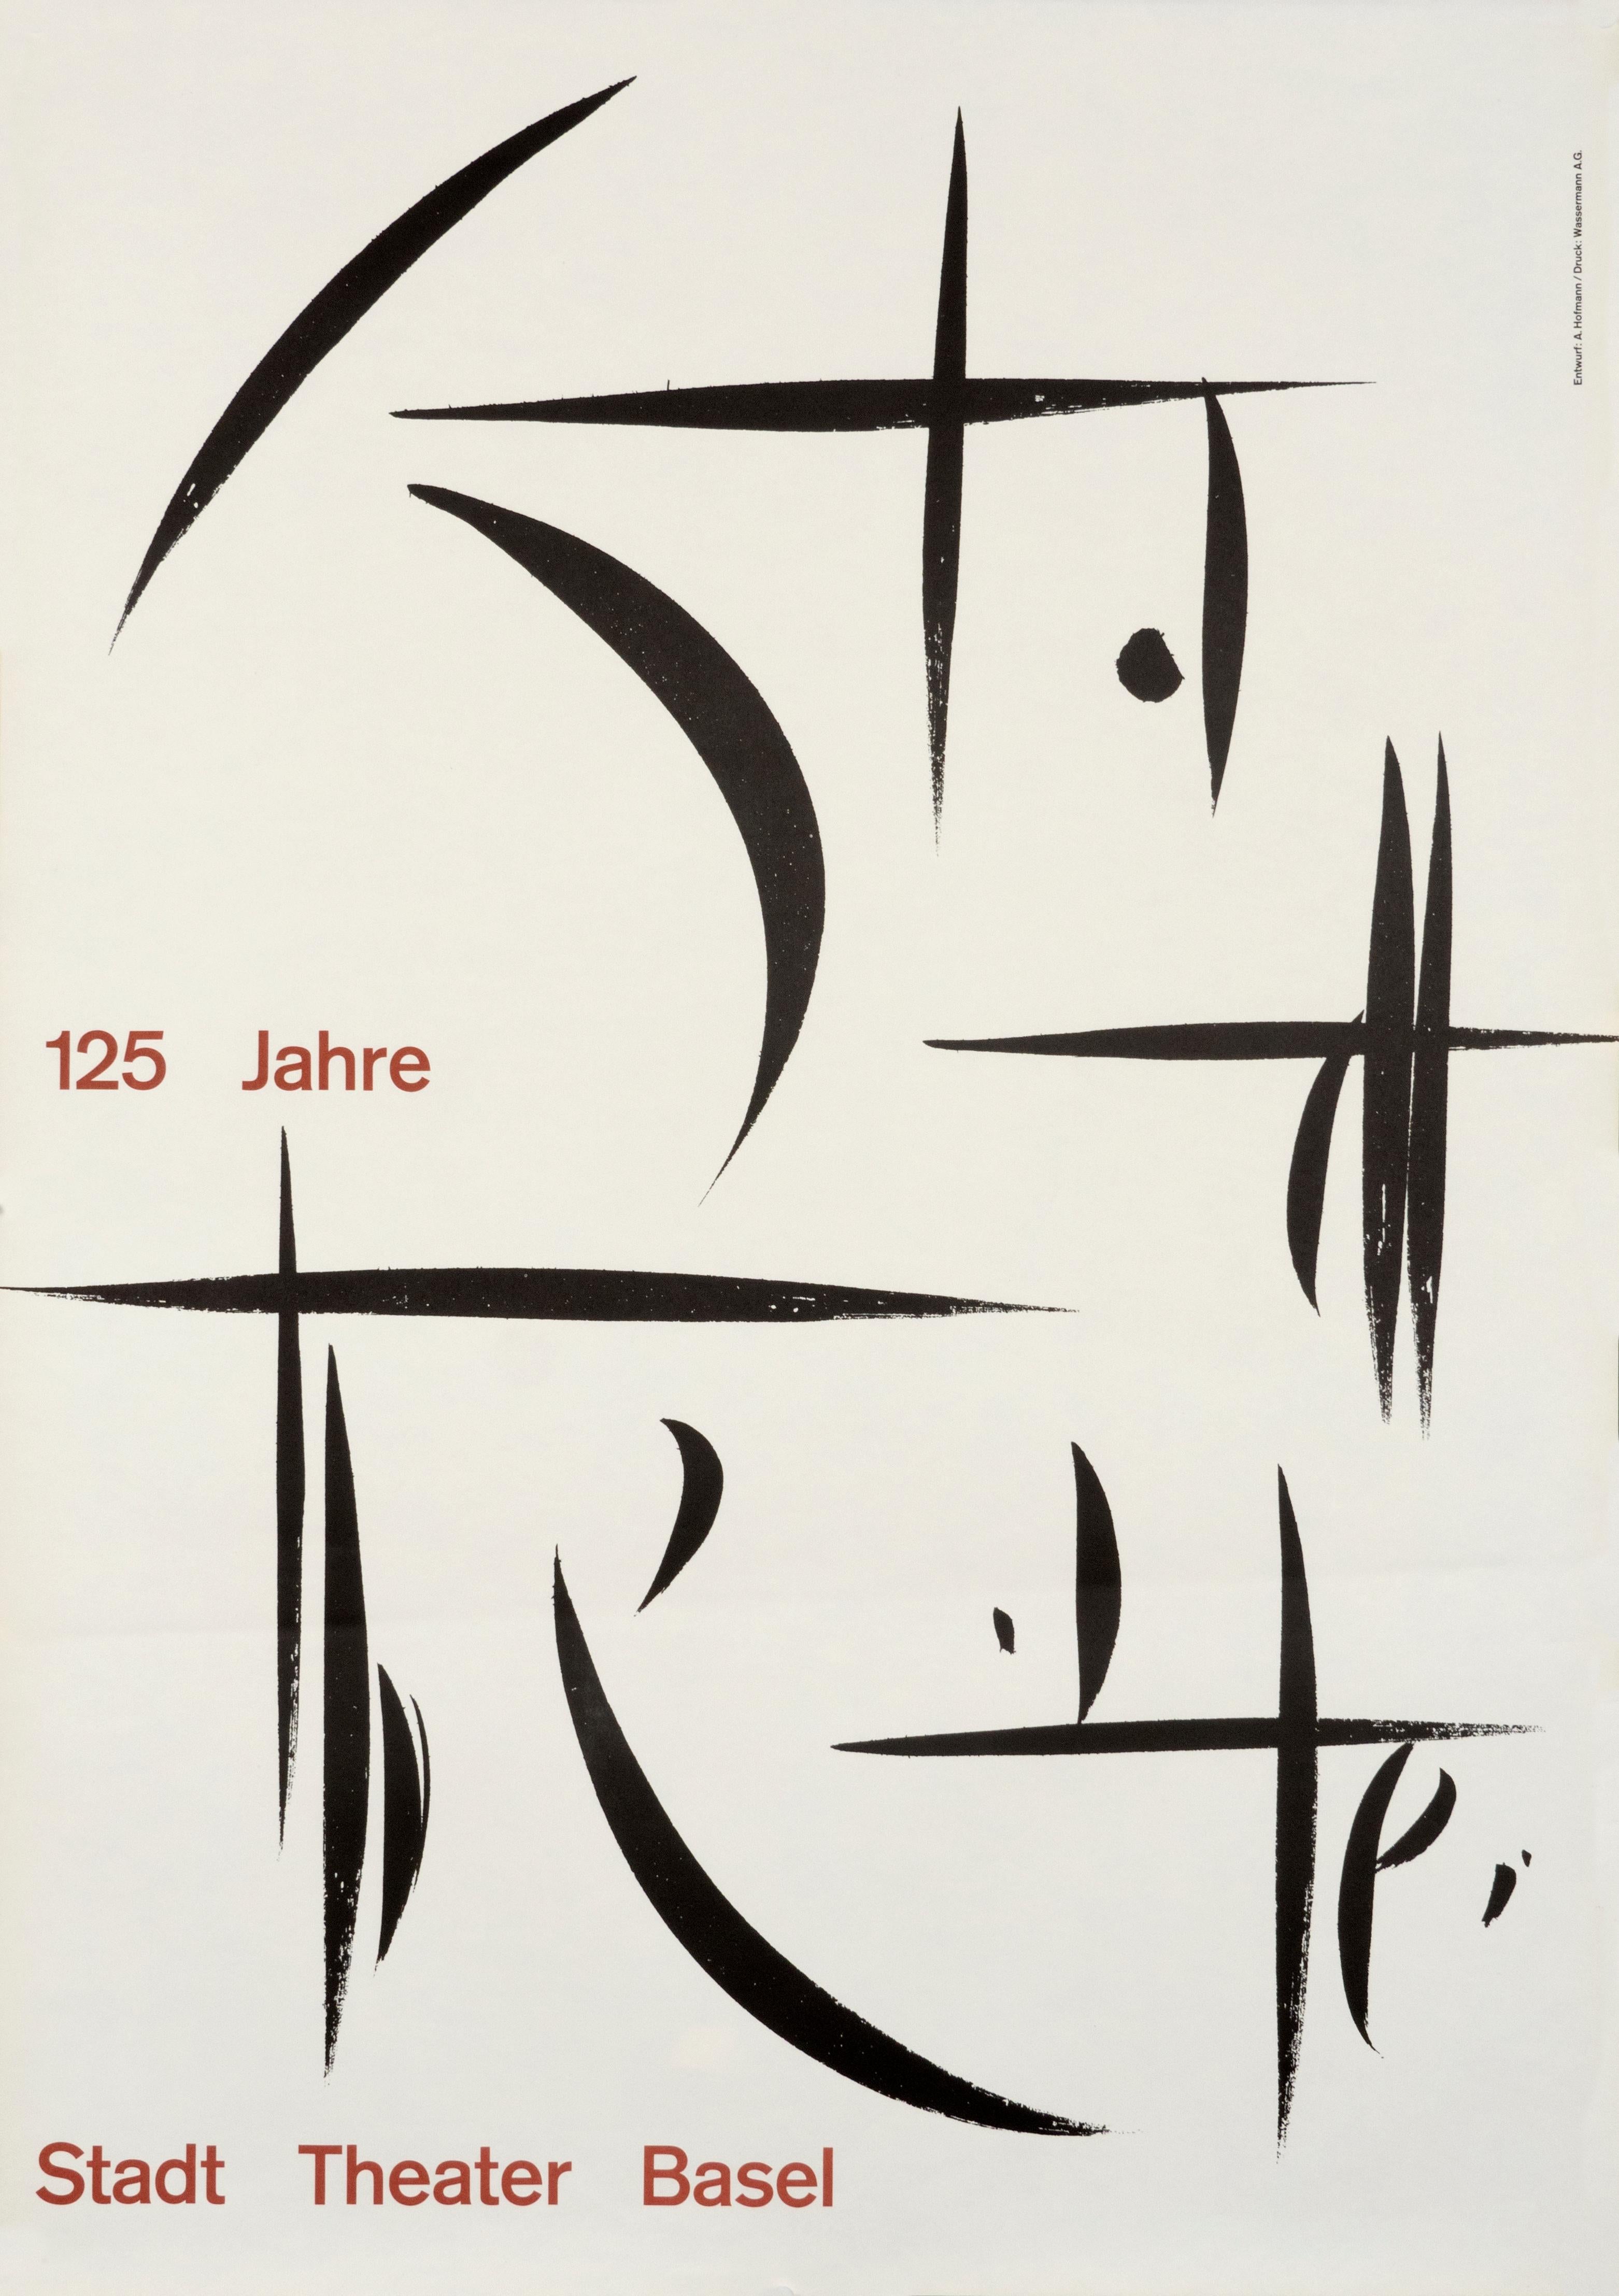 Armin Hofmann Abstract Print - "125 Jahre Stadt Theater Basel" International Typographic Graphic Design Poster